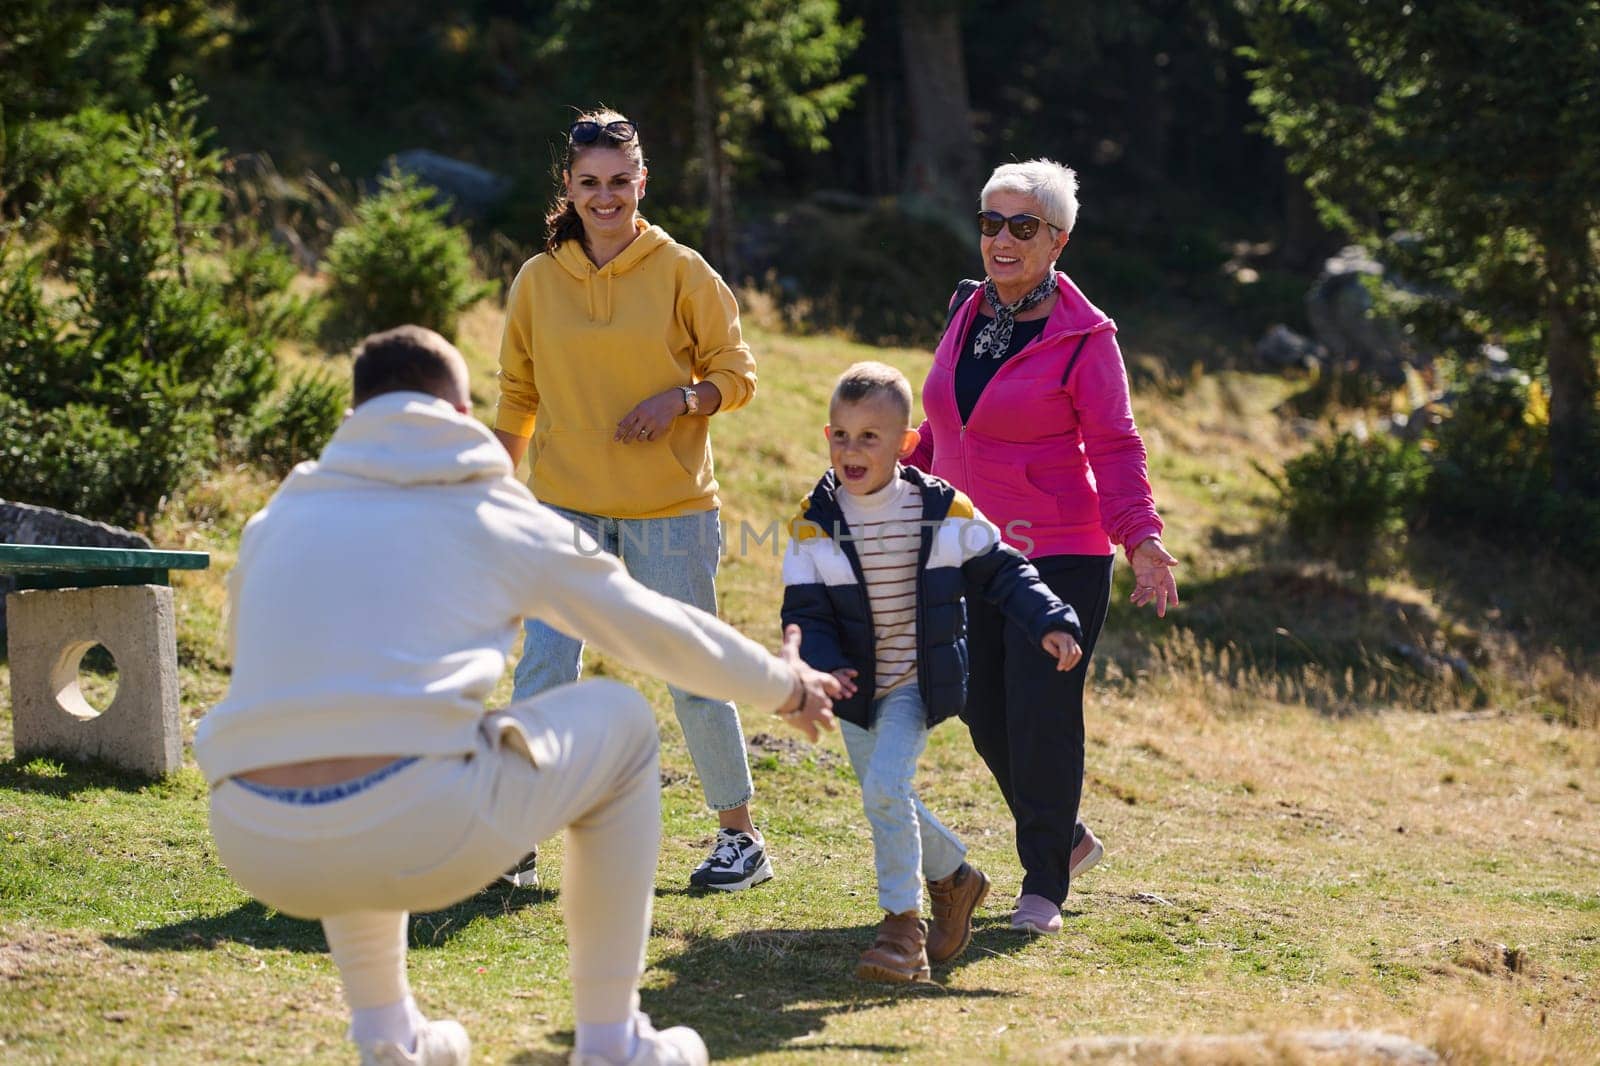 A family shares delightful moments with their friends amid the stunning landscapes of mountains, lakes, and winding paths, promoting a healthy lifestyle and the joy of familial bonds in the embrace of nature's beauty.